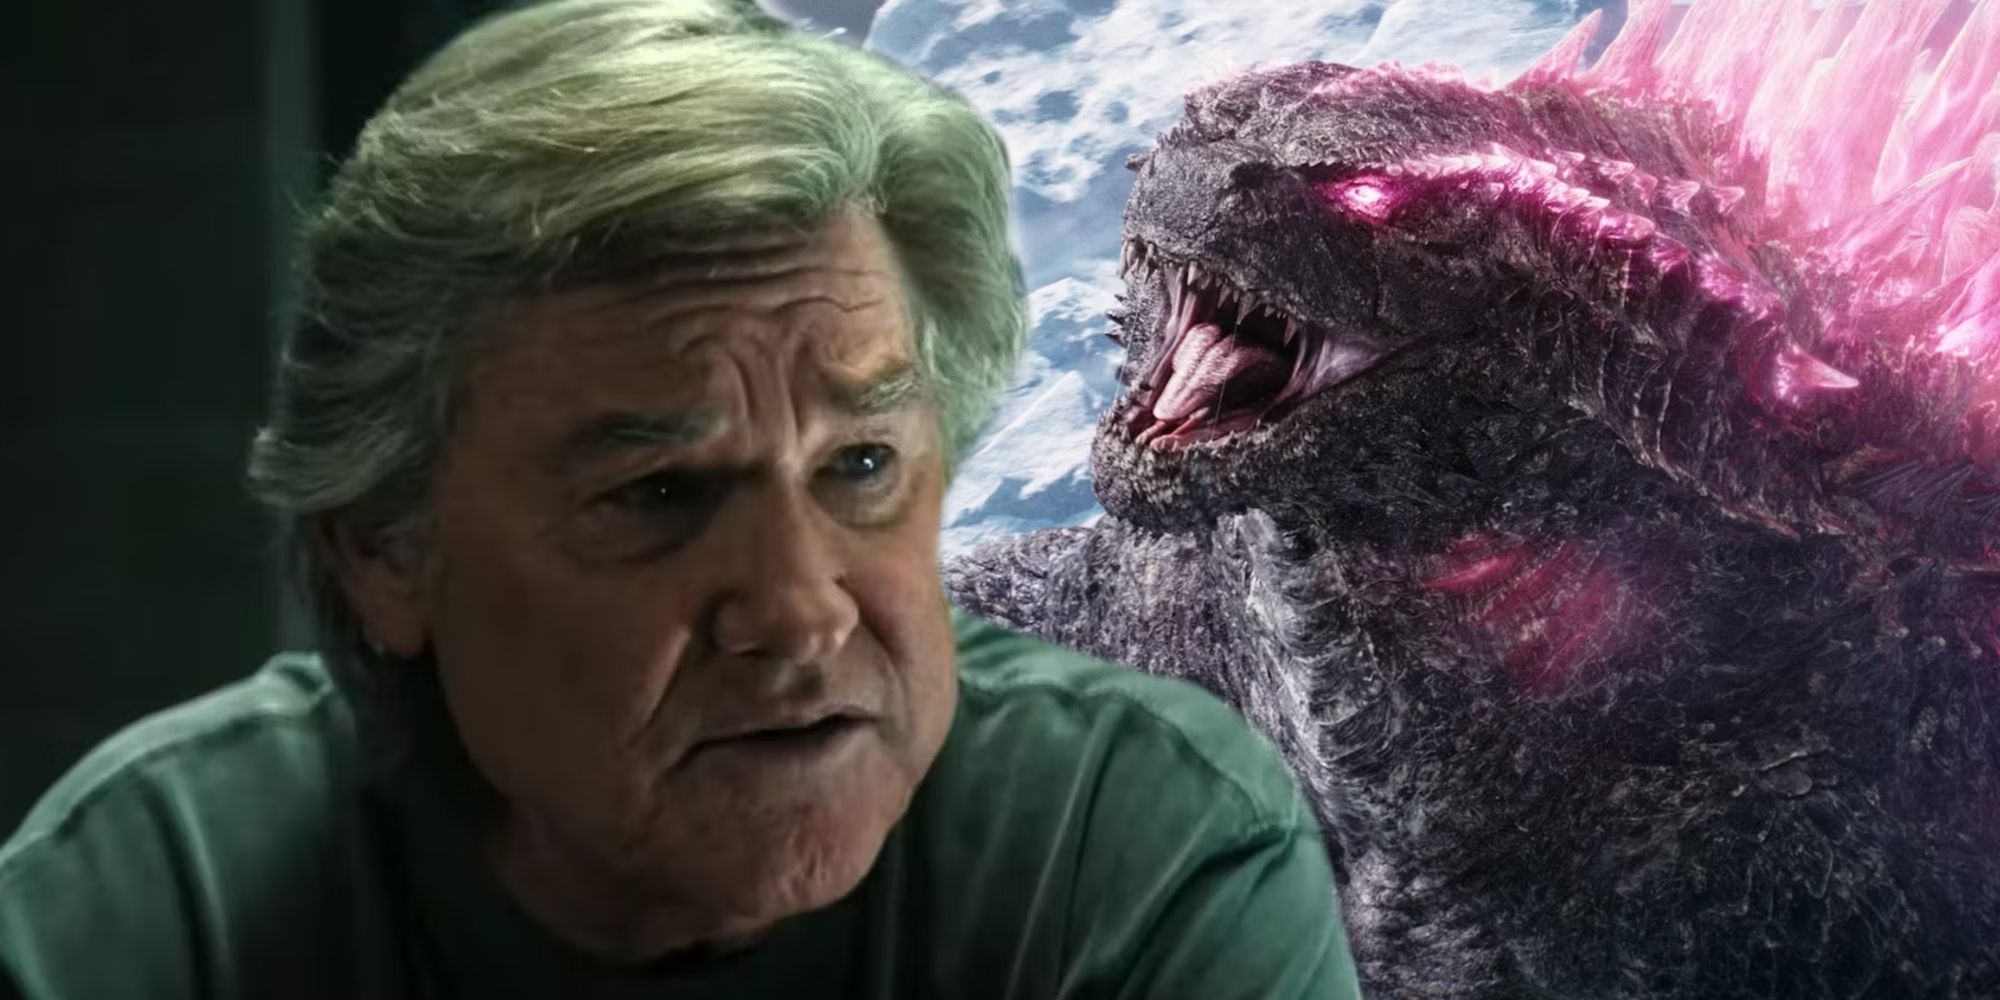 will-the-monsterverse-movies-connect-to-monarch-show?-godzilla-x-kong-director-carefully-responds